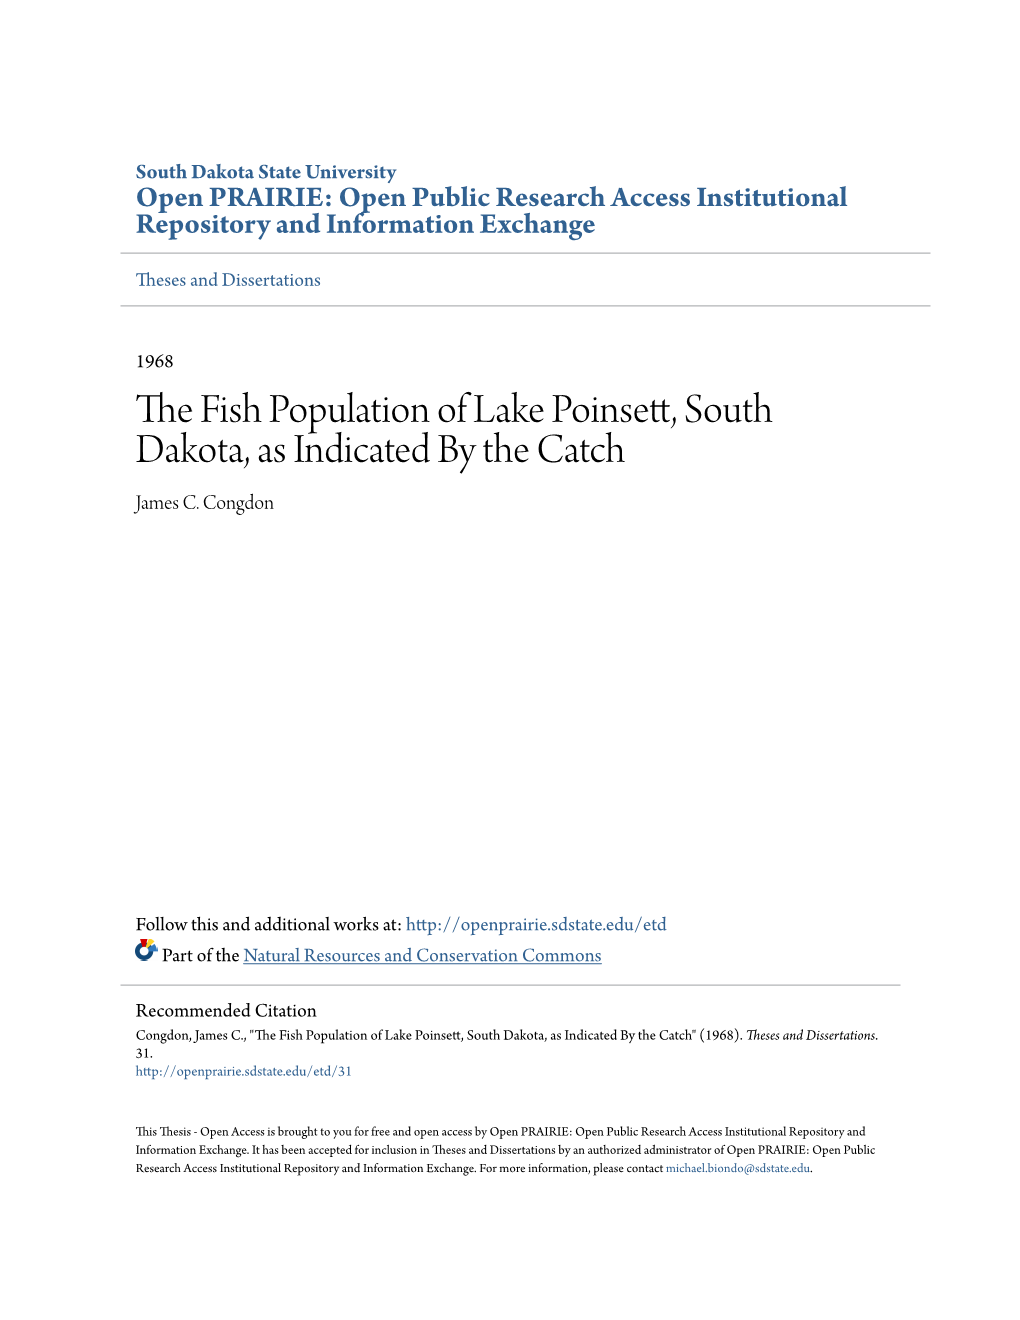 The Fish Population of Lake Poinsett, South Dakota, As Indicated by The